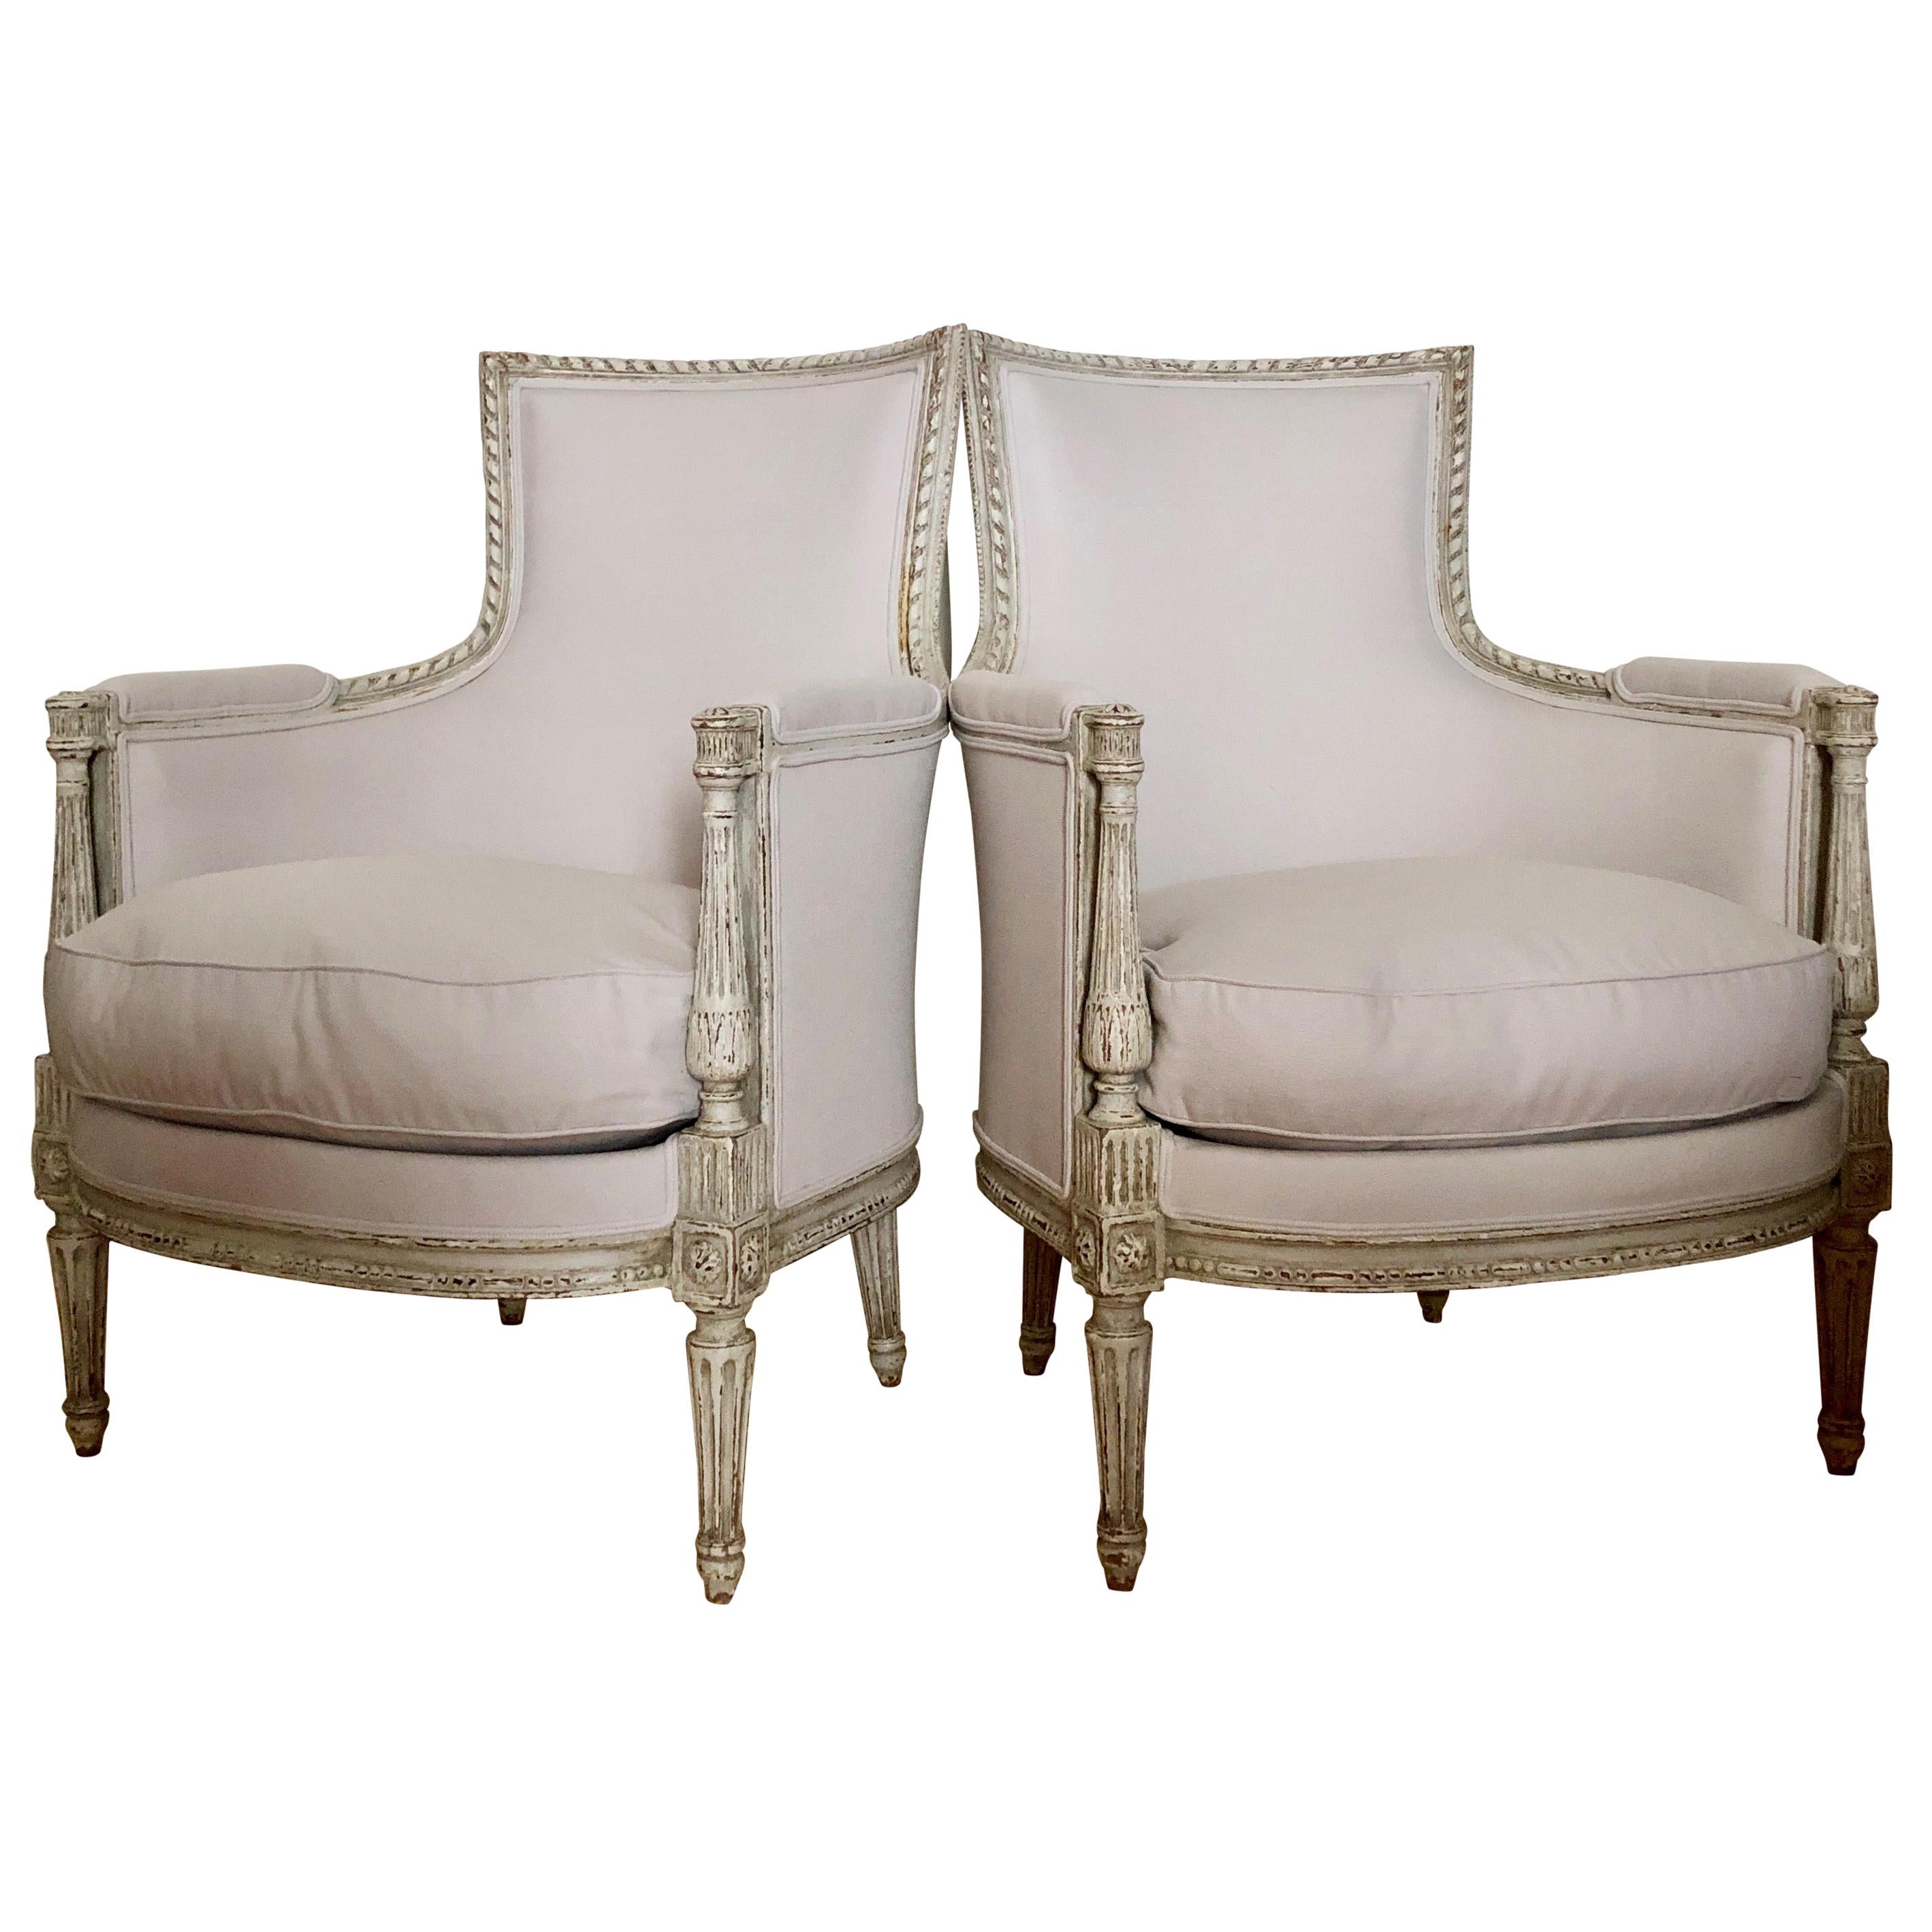 Pair of Painted 19th Century French Directoire Style Bergères